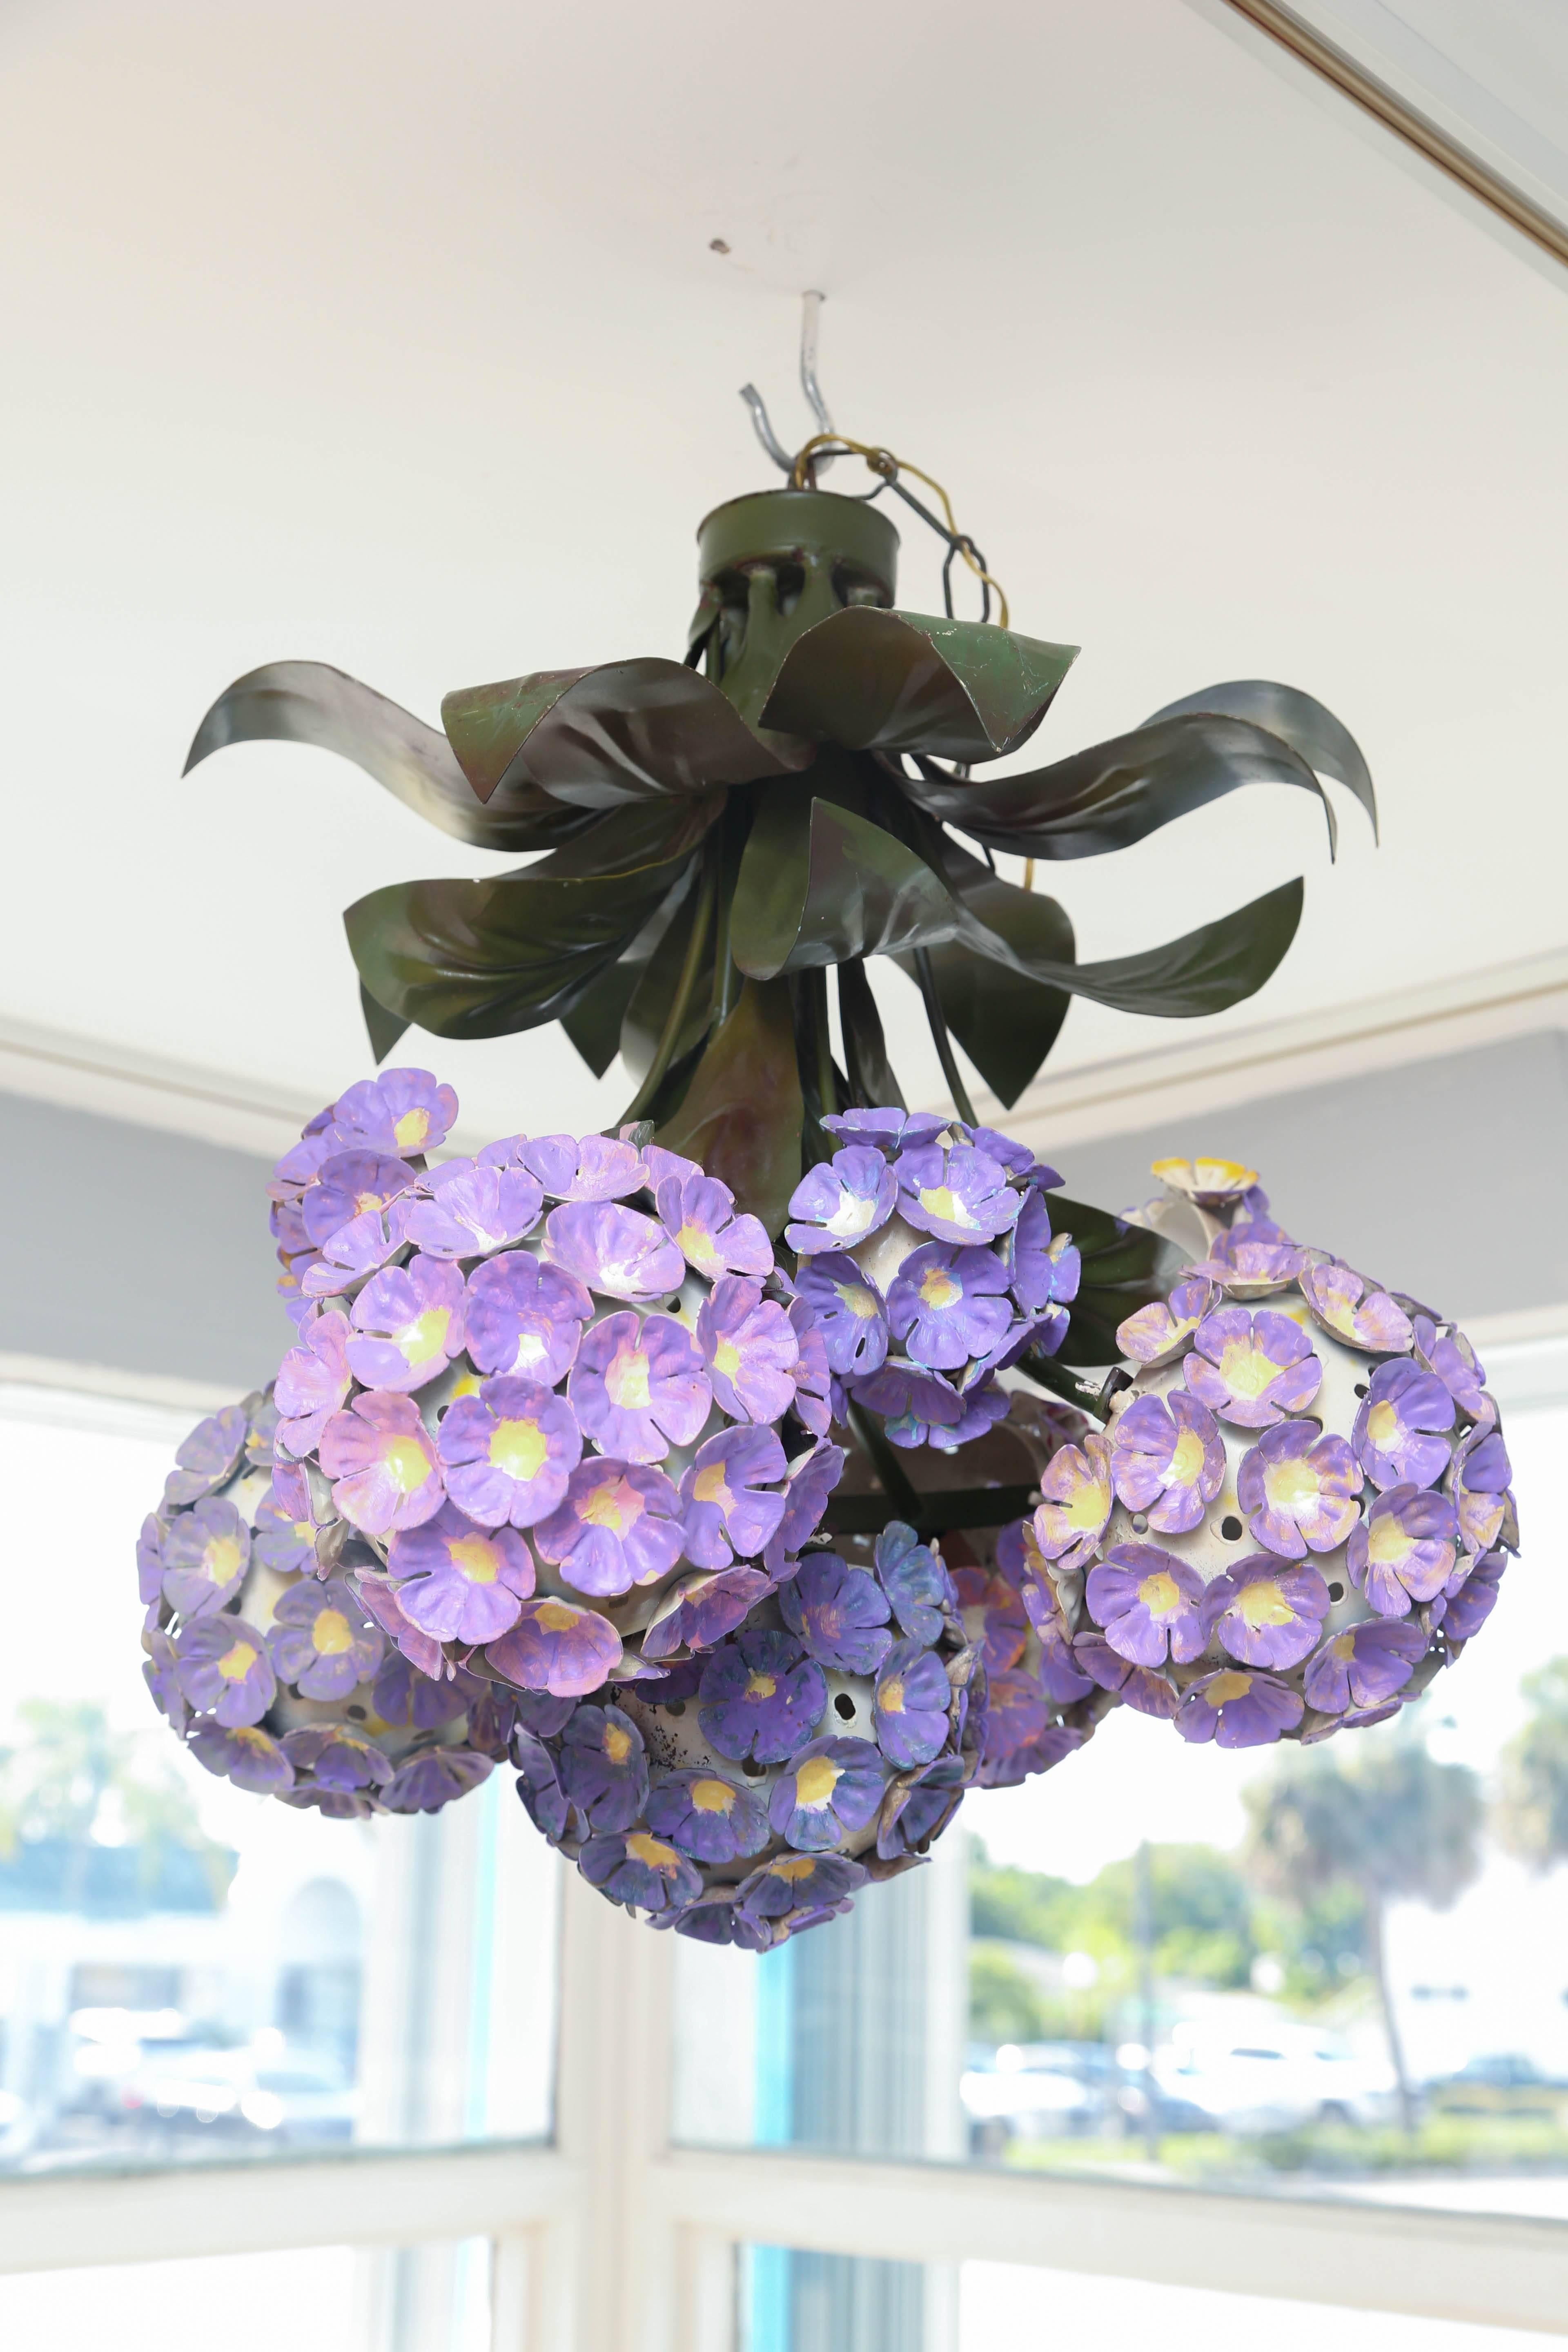 Superb style with vibrant and realistic color. A masterful and fanciful ceiling fixture.